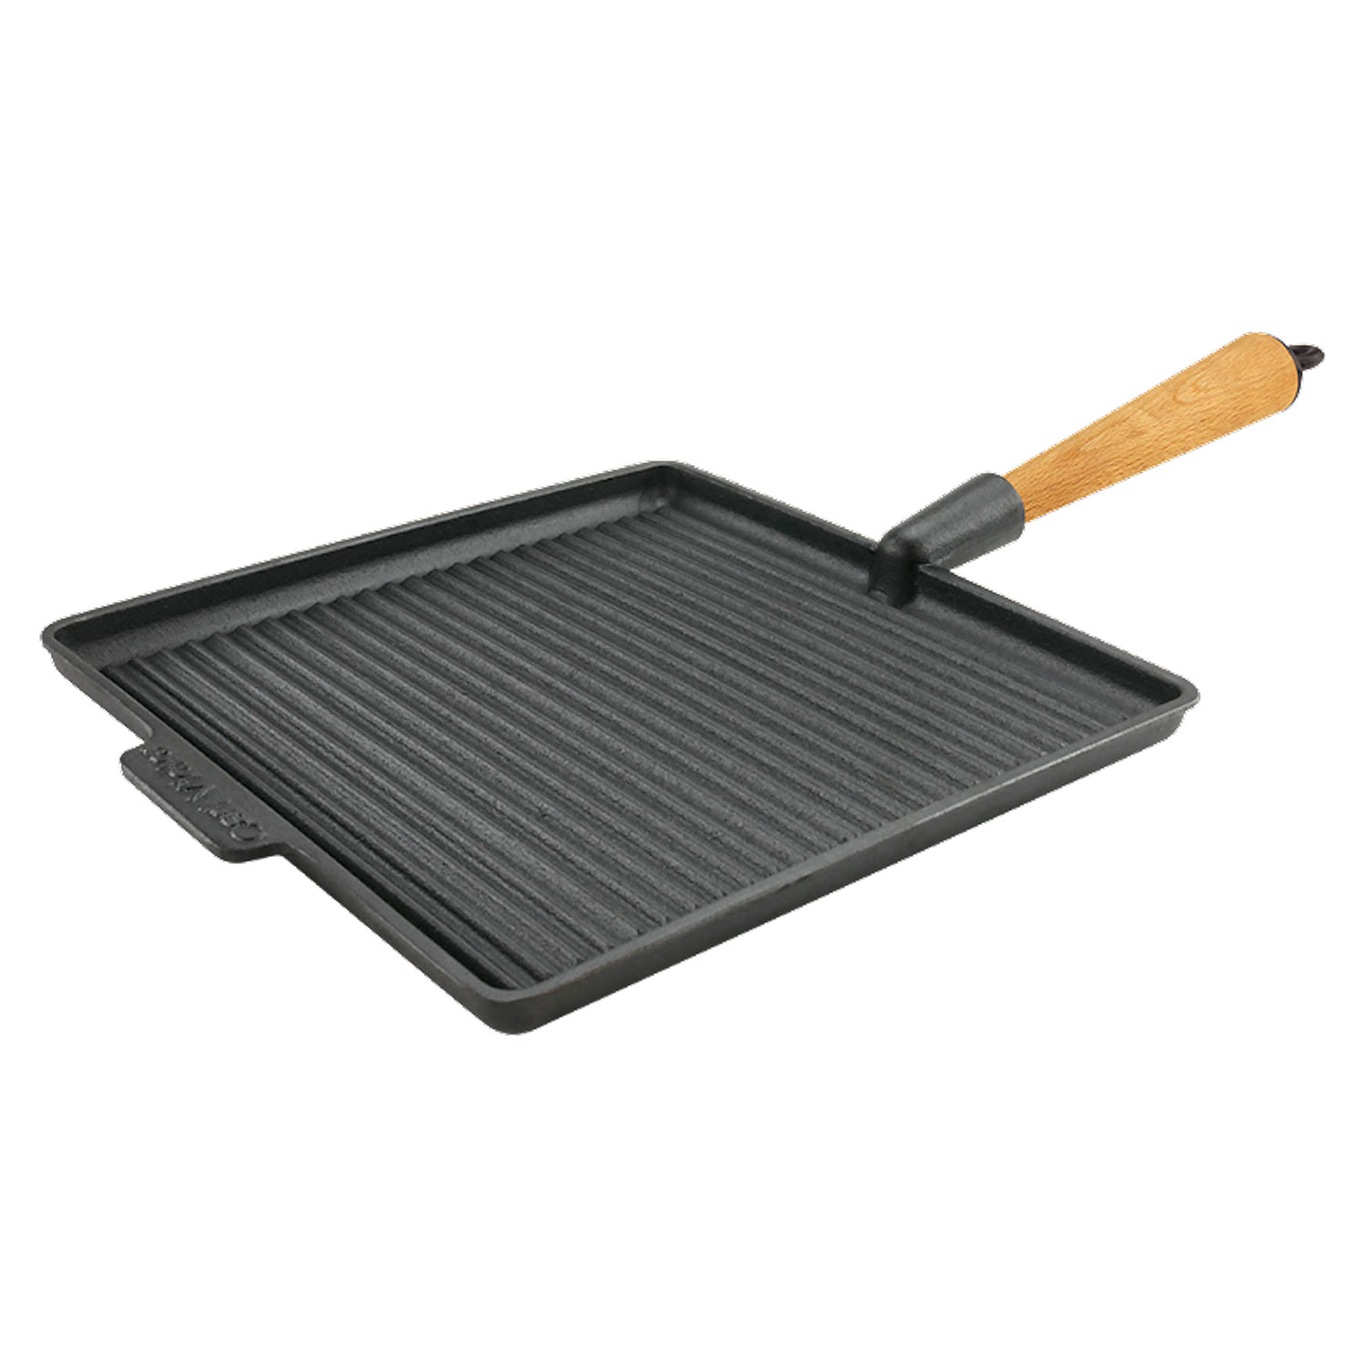 Squared Grill Pan 28x28 cm With Handle In Beech